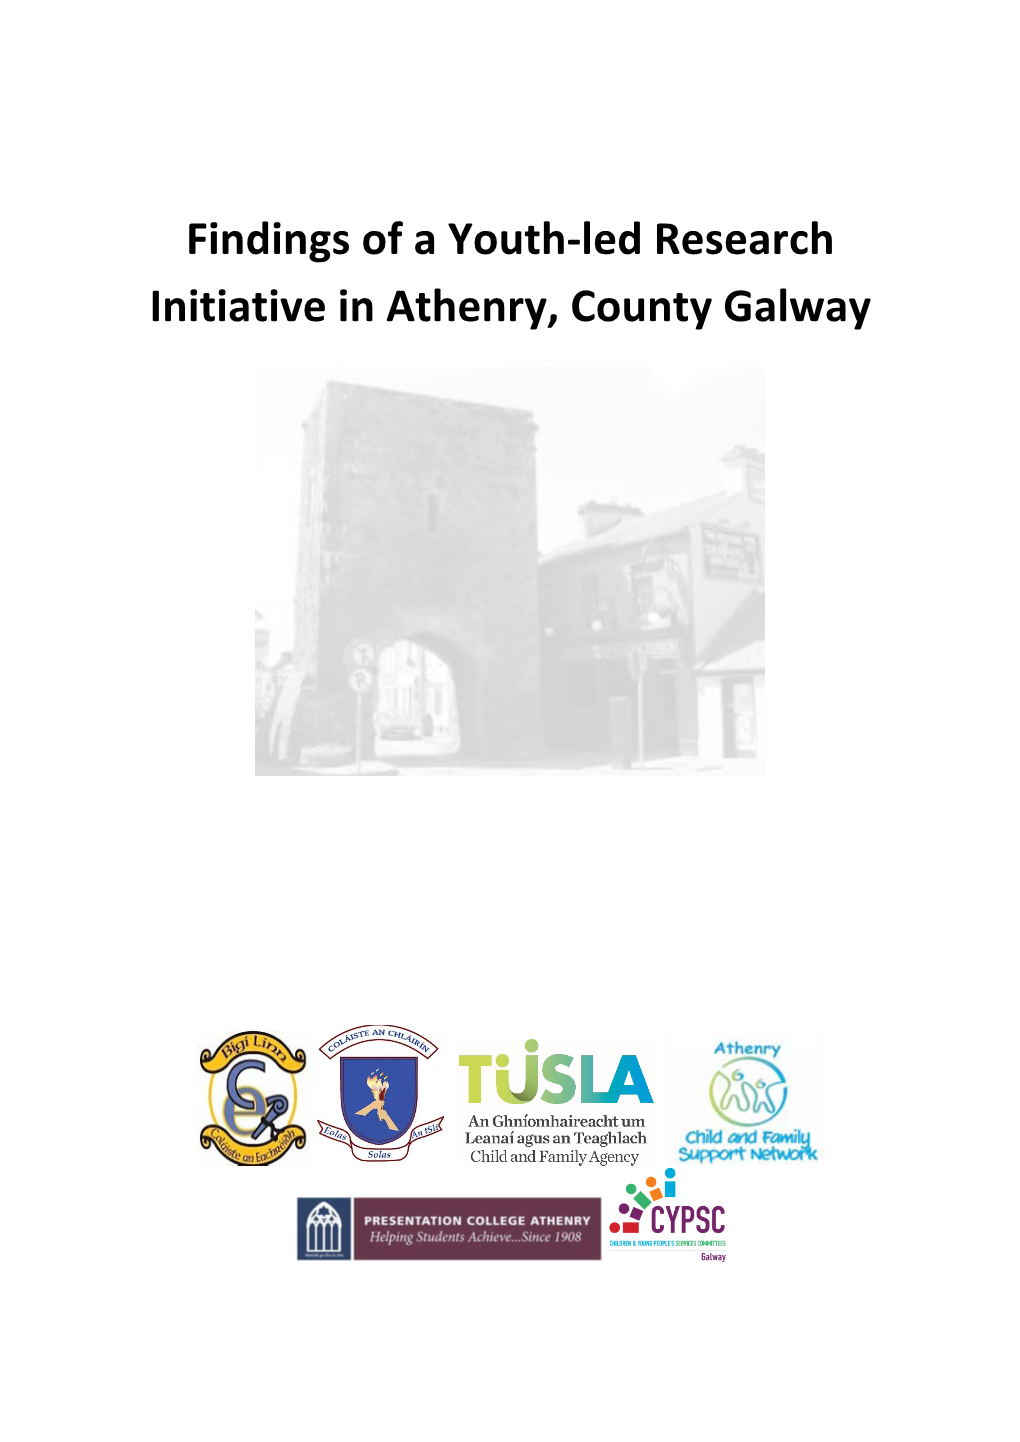 Findings of a Youth-Led Research Initiative in Athenry, County Galway